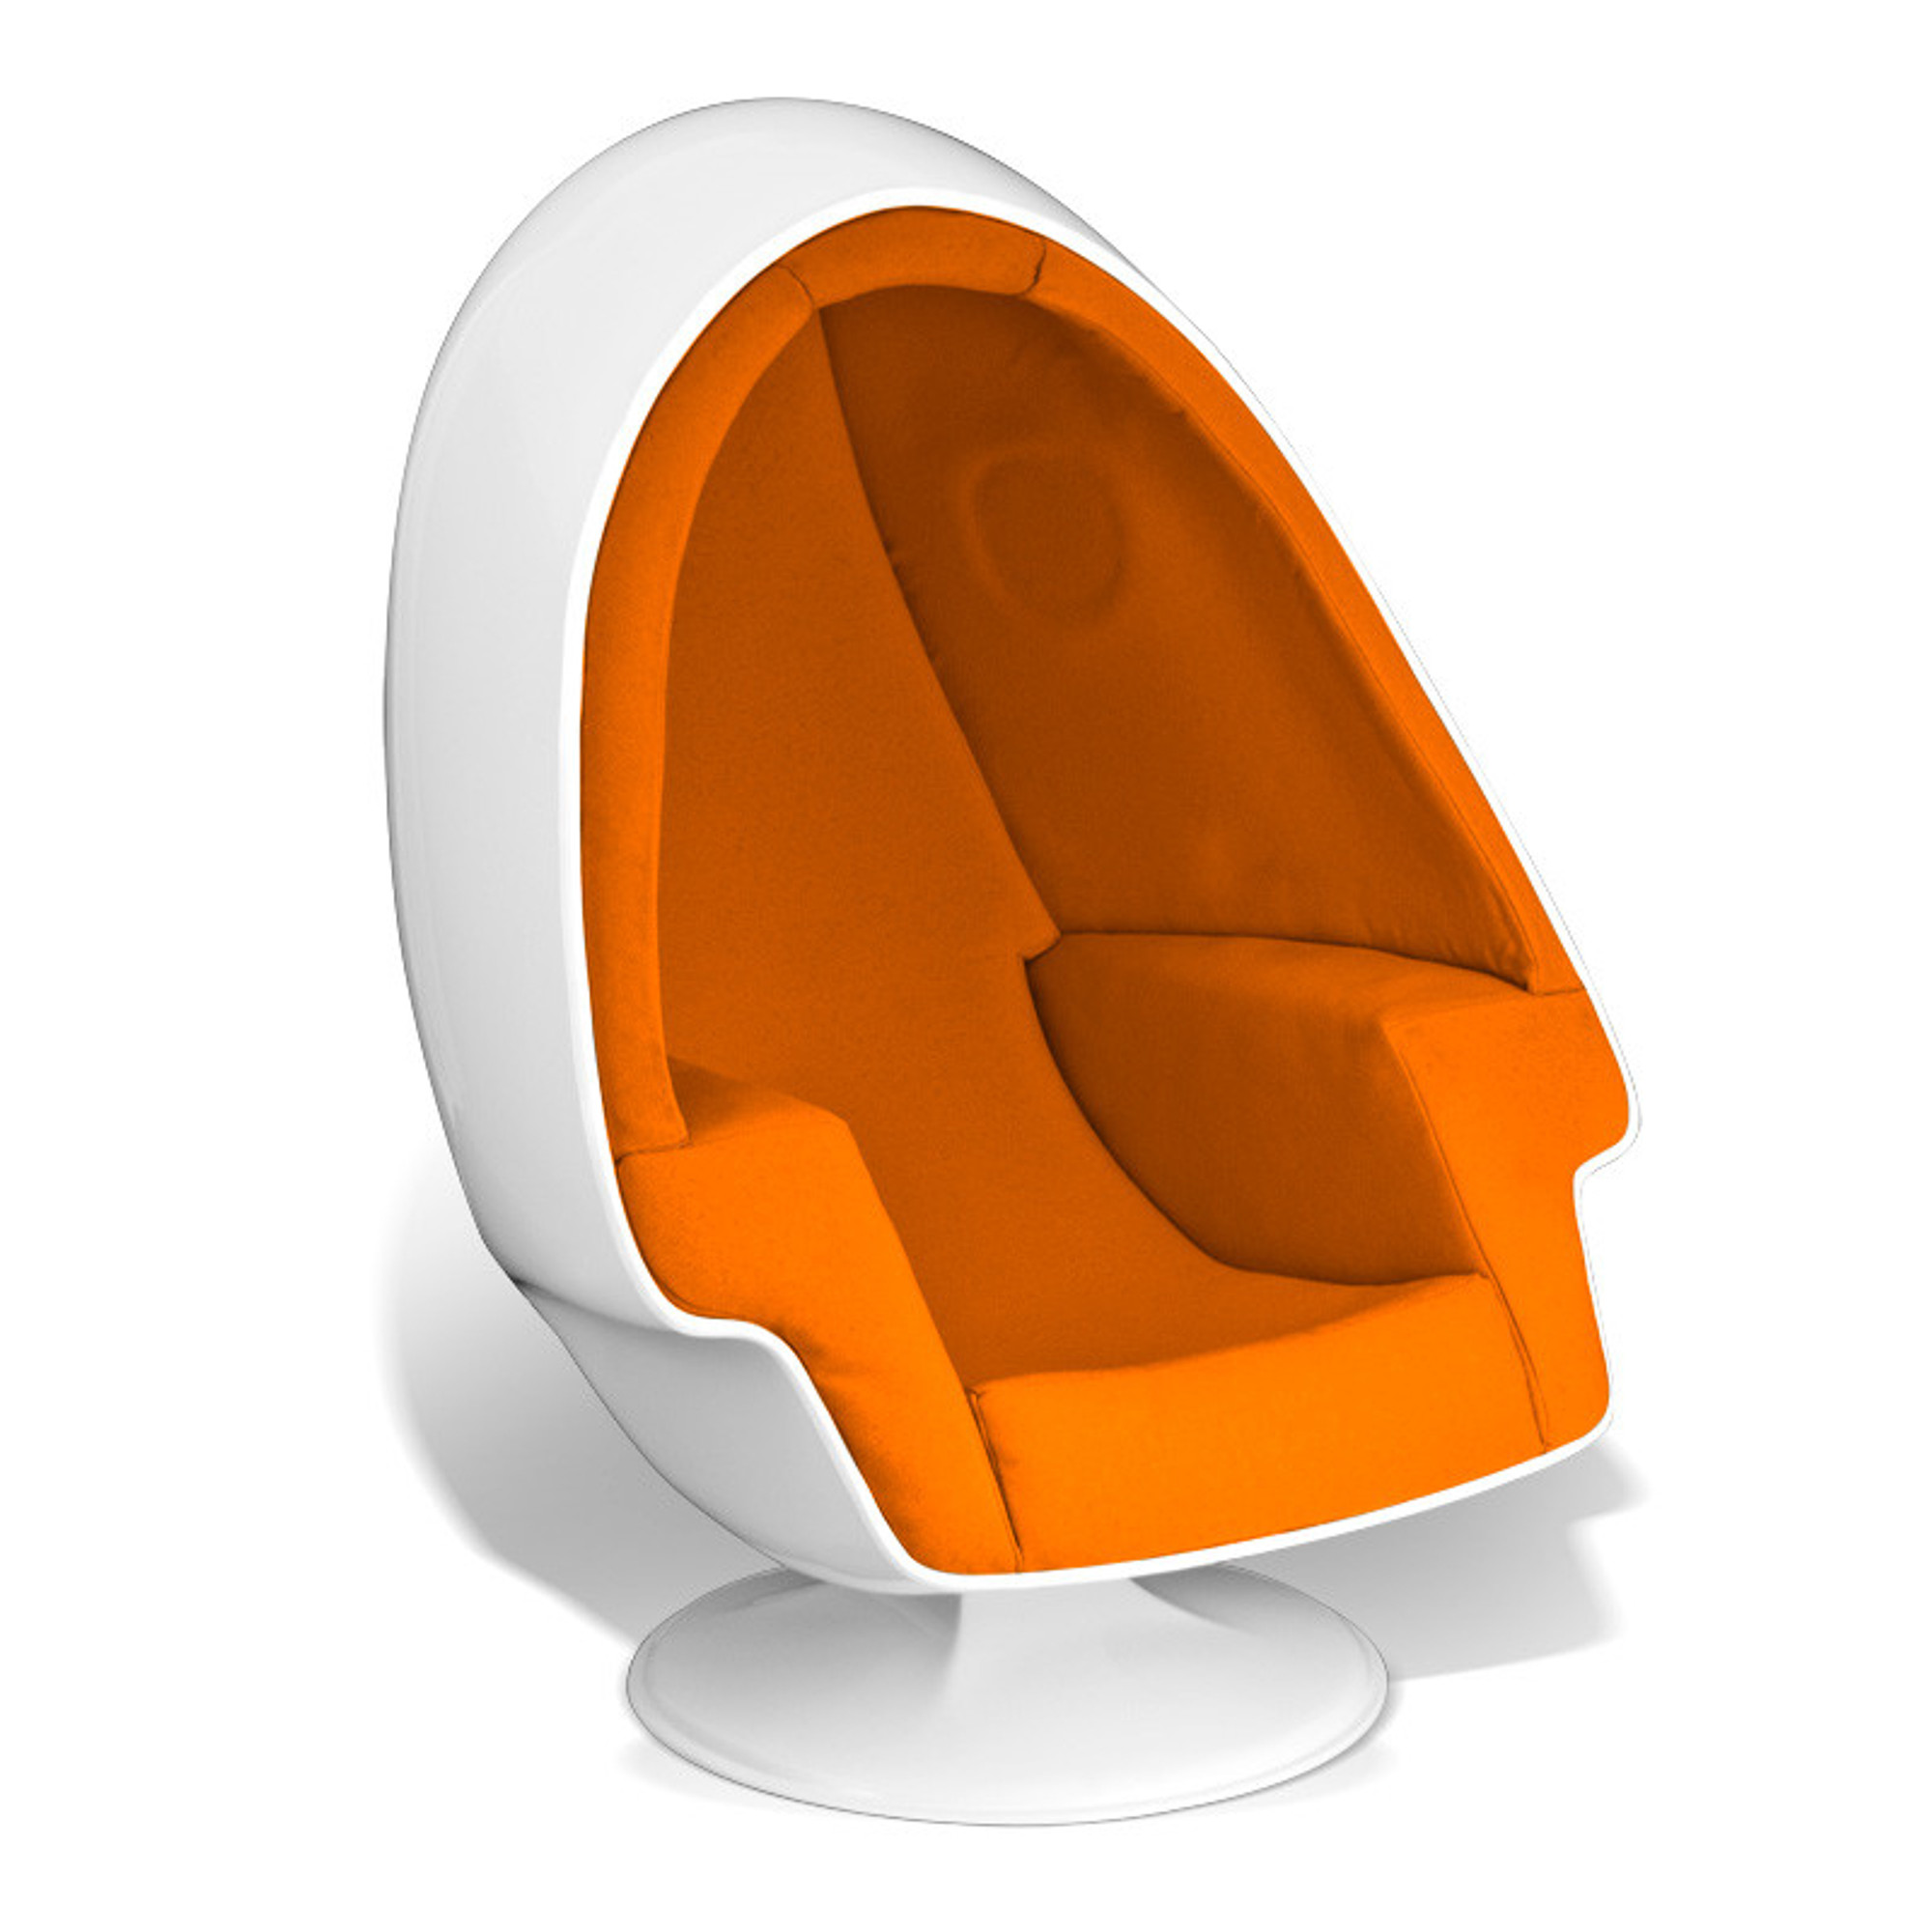 3 Alpha Chair Accessories Help the Transition from Birth through Adult